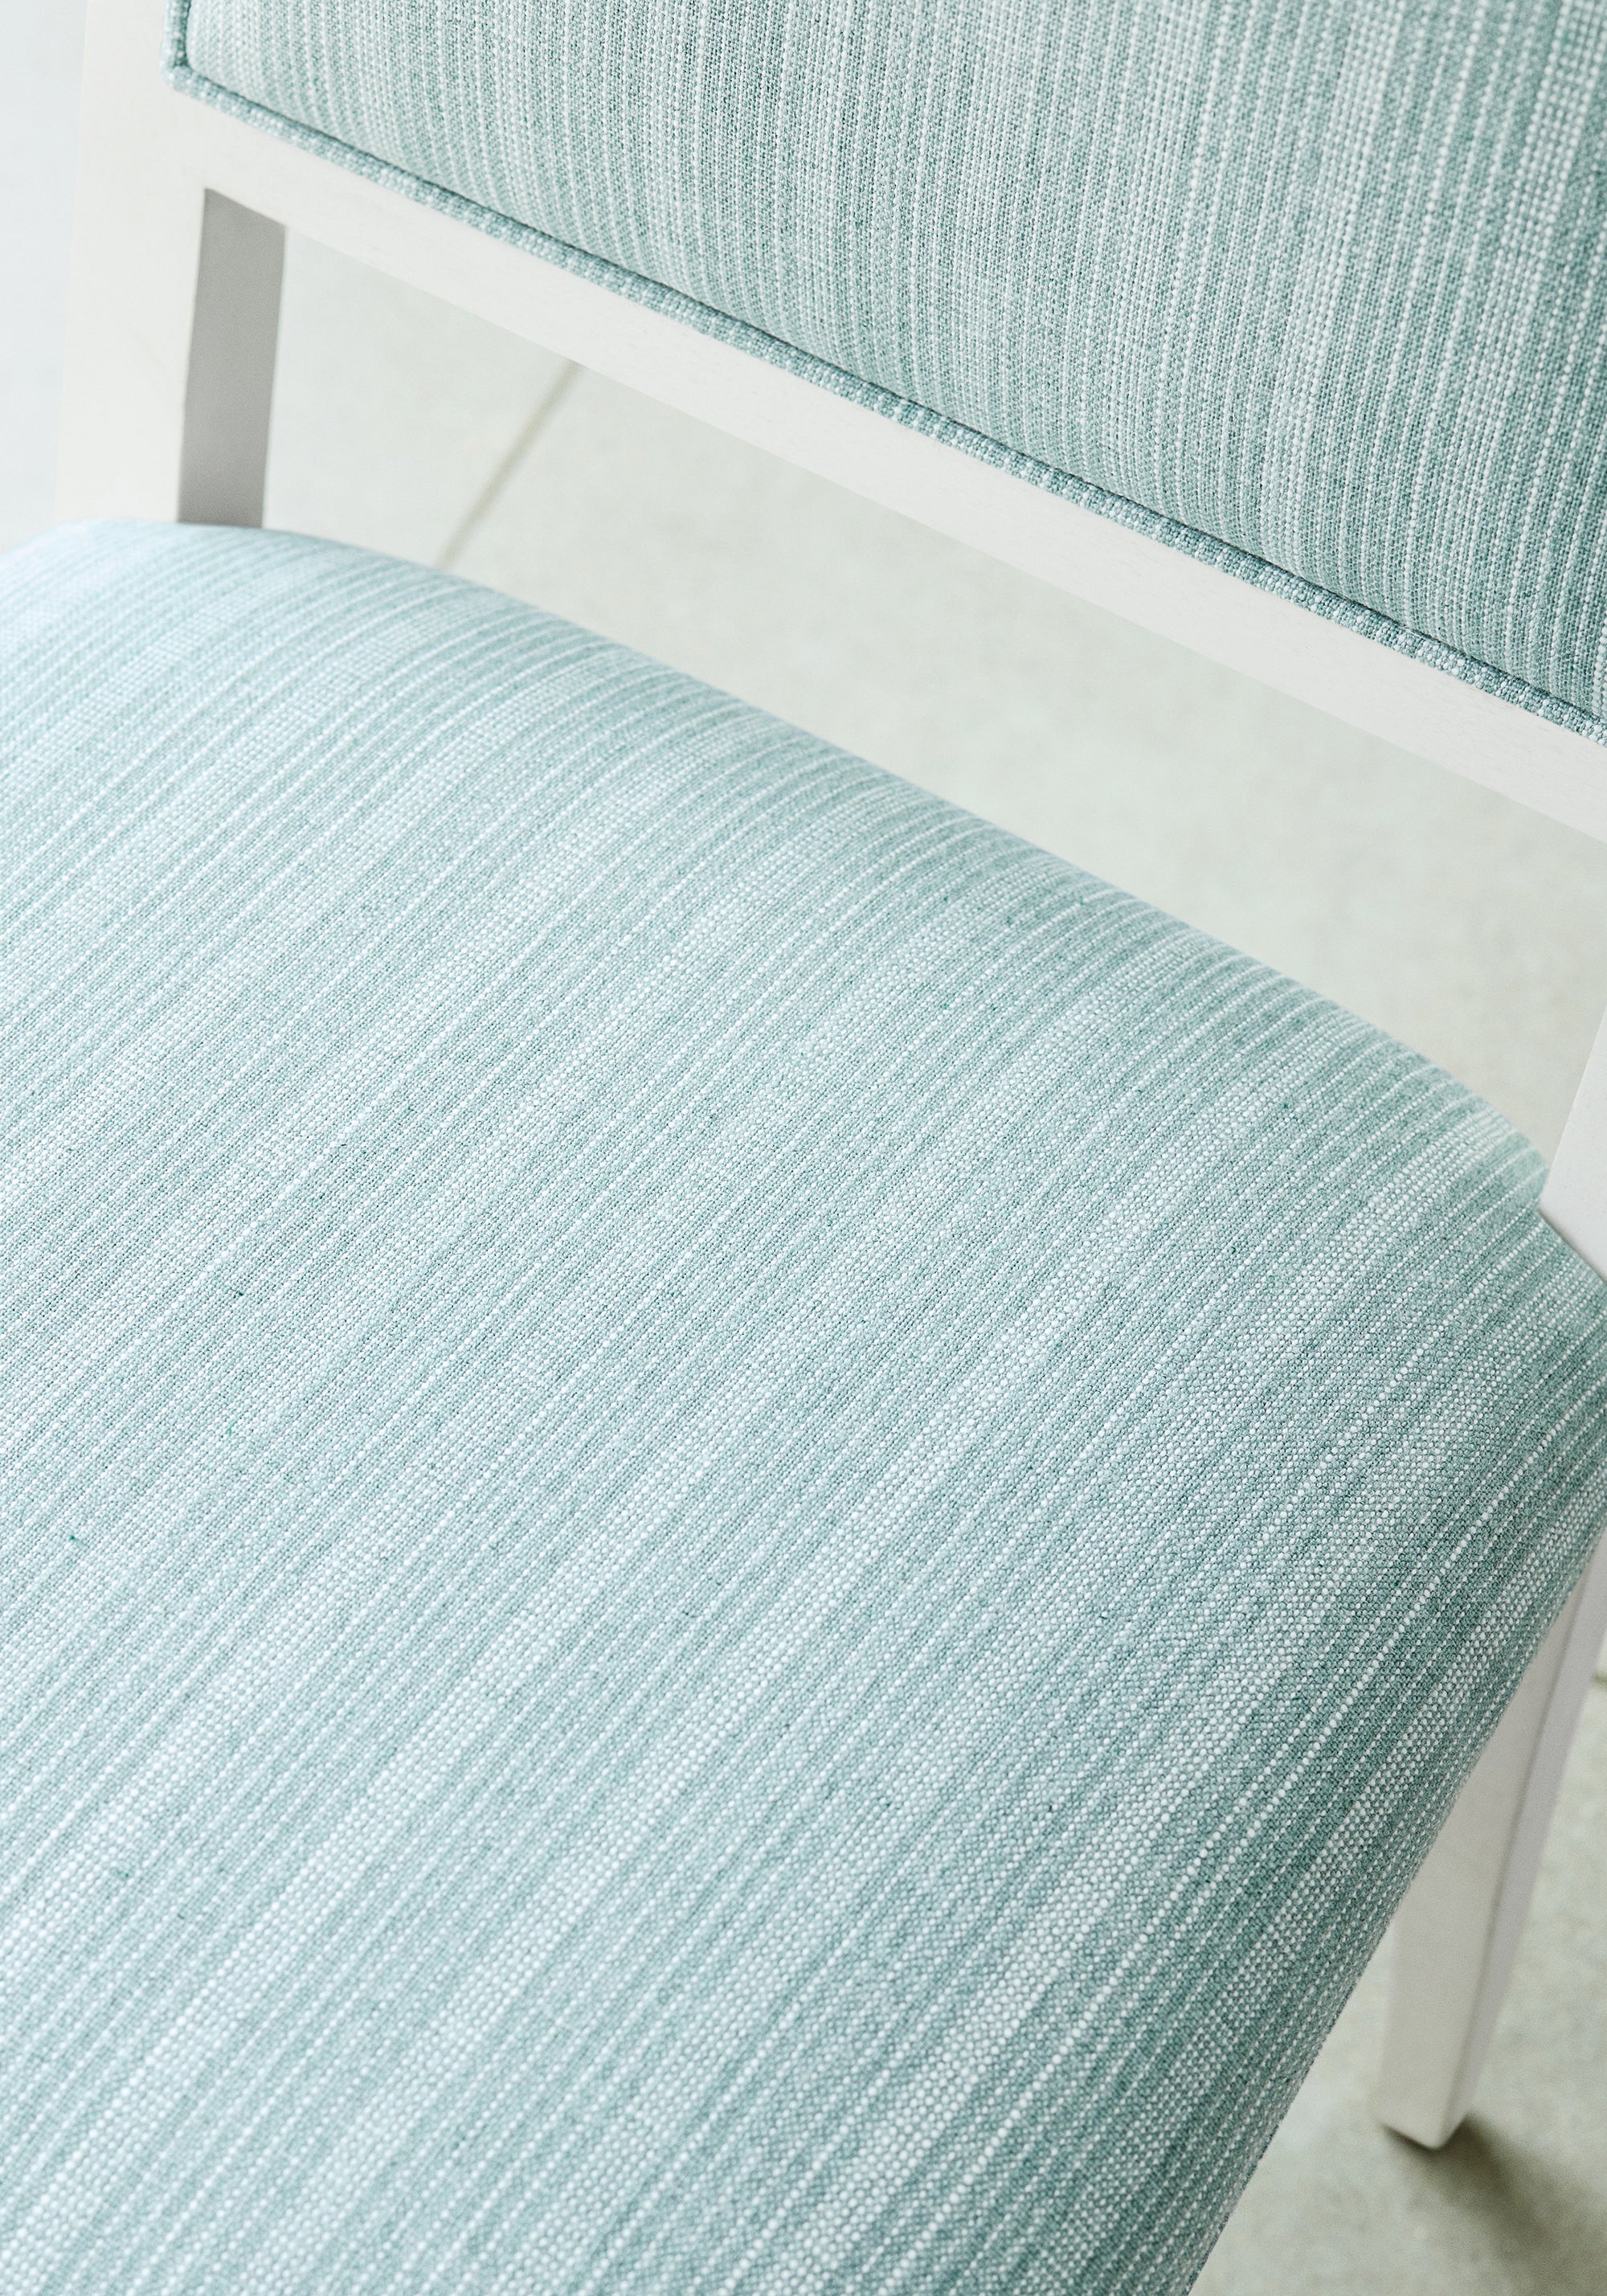 Dining chair in Ebro Stripe fabric in seafoam color - pattern number W8508 - by Thibaut in the Villa collection